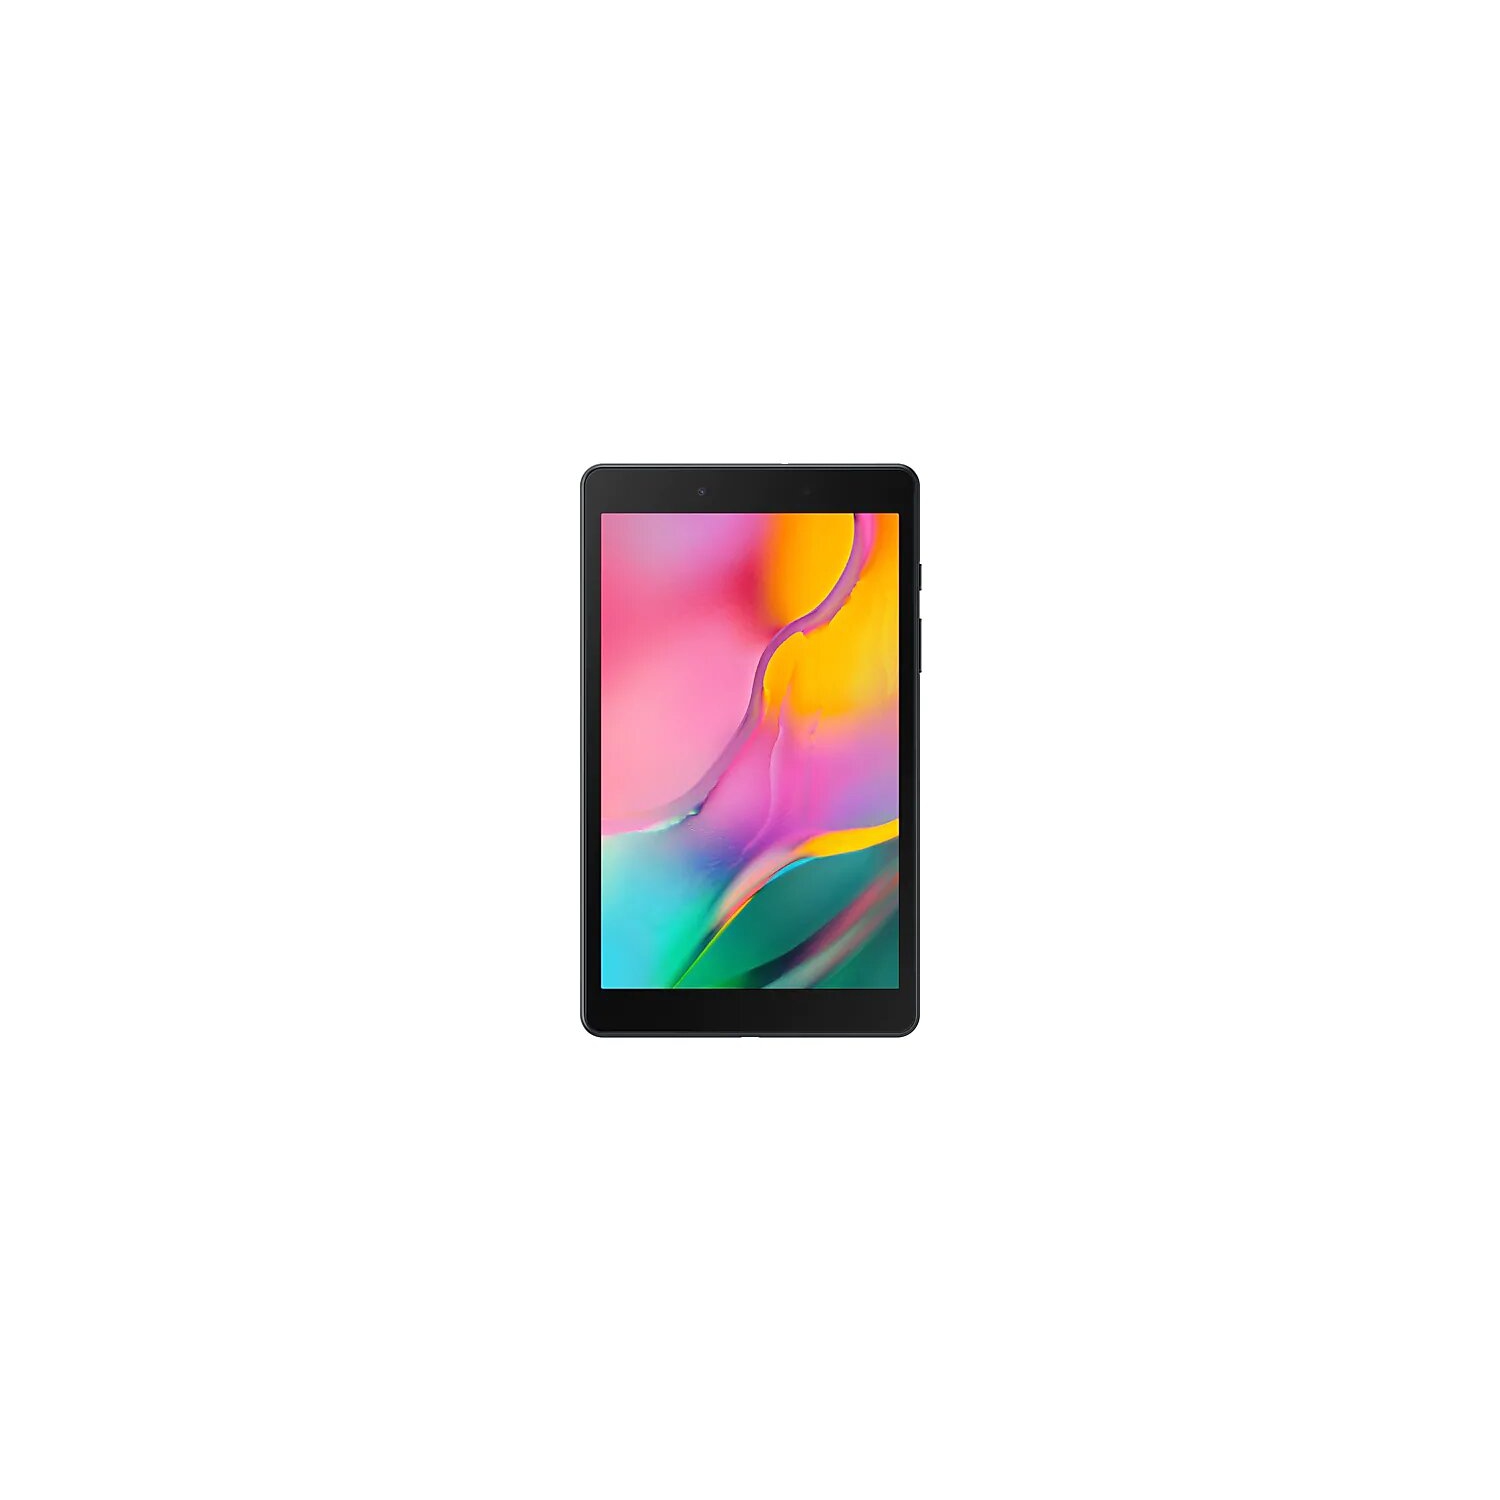 Refurbished (Excellent) - Samsung Galaxy Tab A 8" 32GB Android Tablet with Quad-Core Processor Black